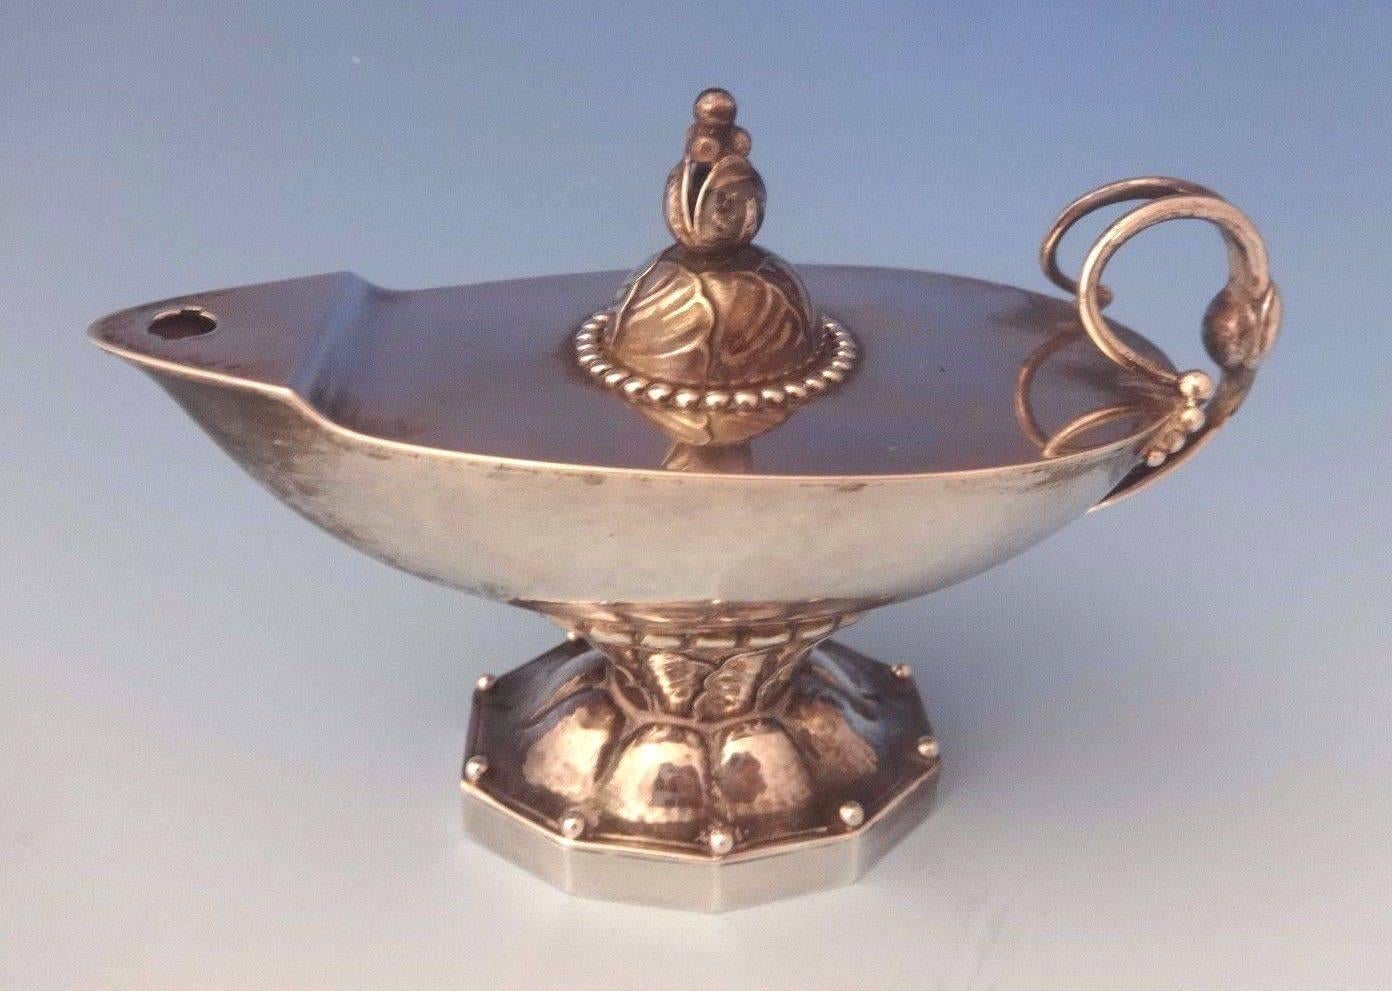 Georg Jensen.
Sterling silver Arts & Crafts Aladdin oil lamp style cigar lighter #12 with wonderful leaf and beaded detail by Georg Jensen. It has old GI marks and dates from 1915-1930. It is not monogrammed. It no longer has the flame snuffer